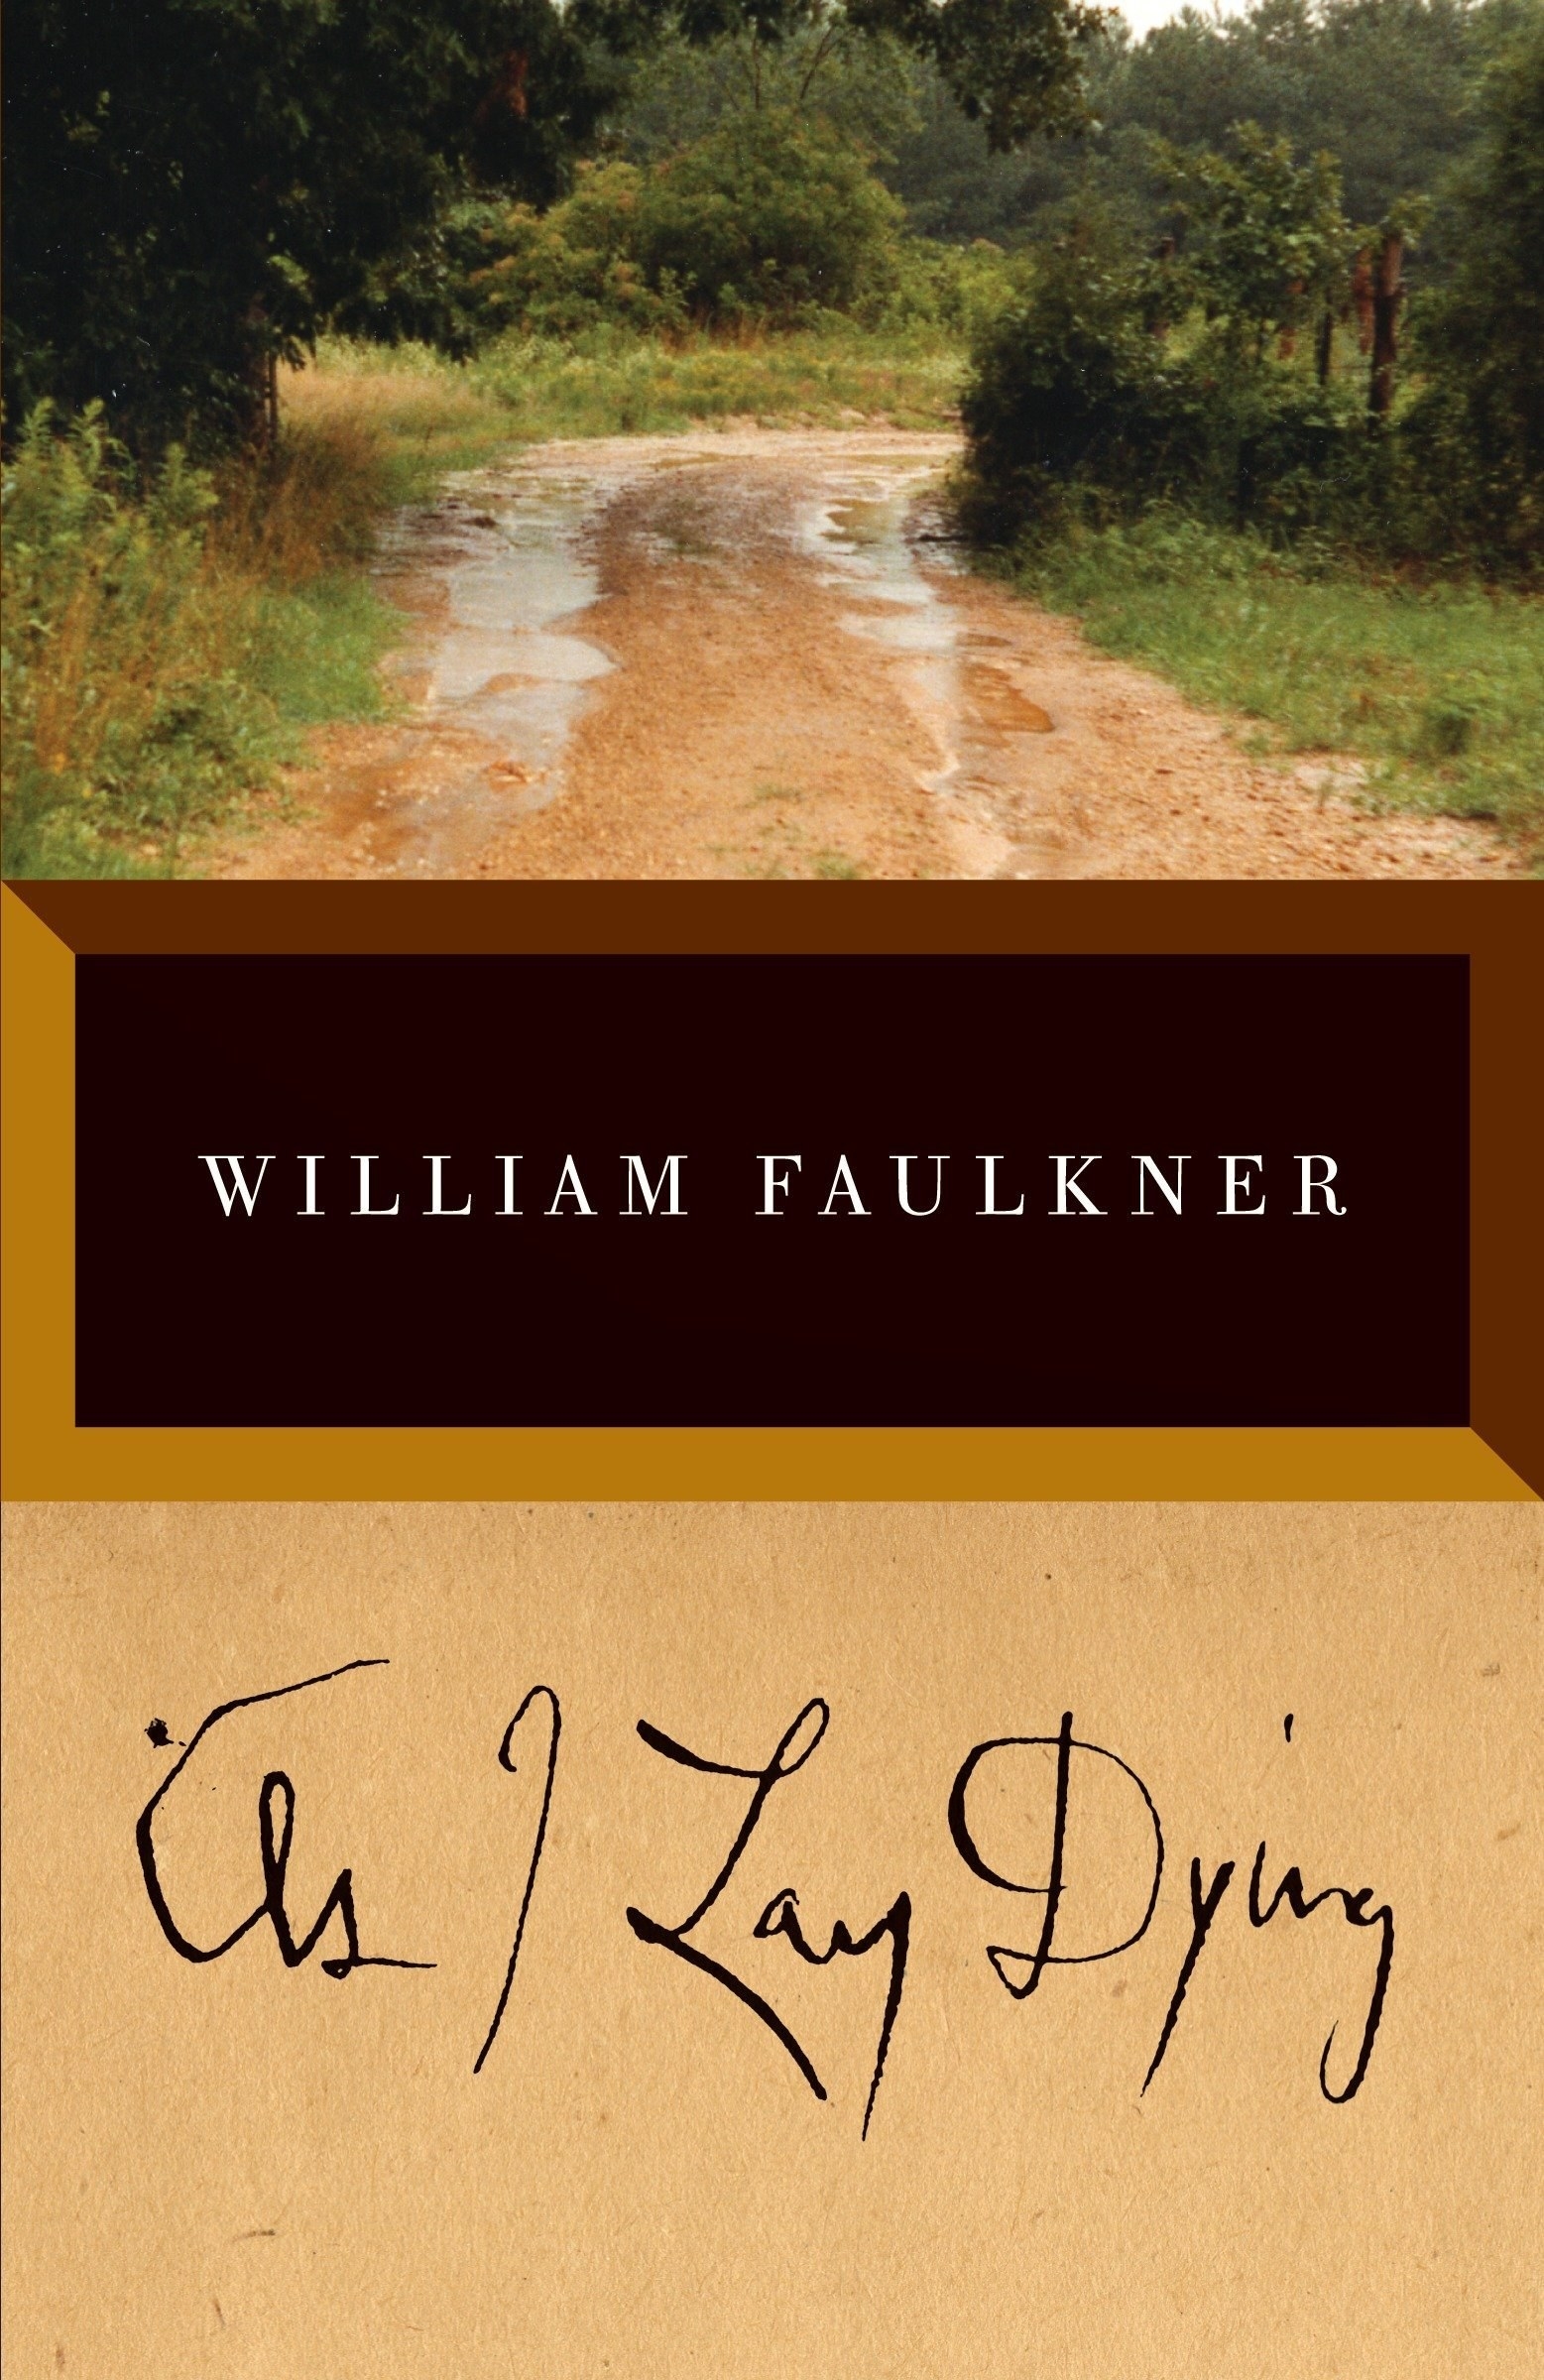 dirt road on the book cover